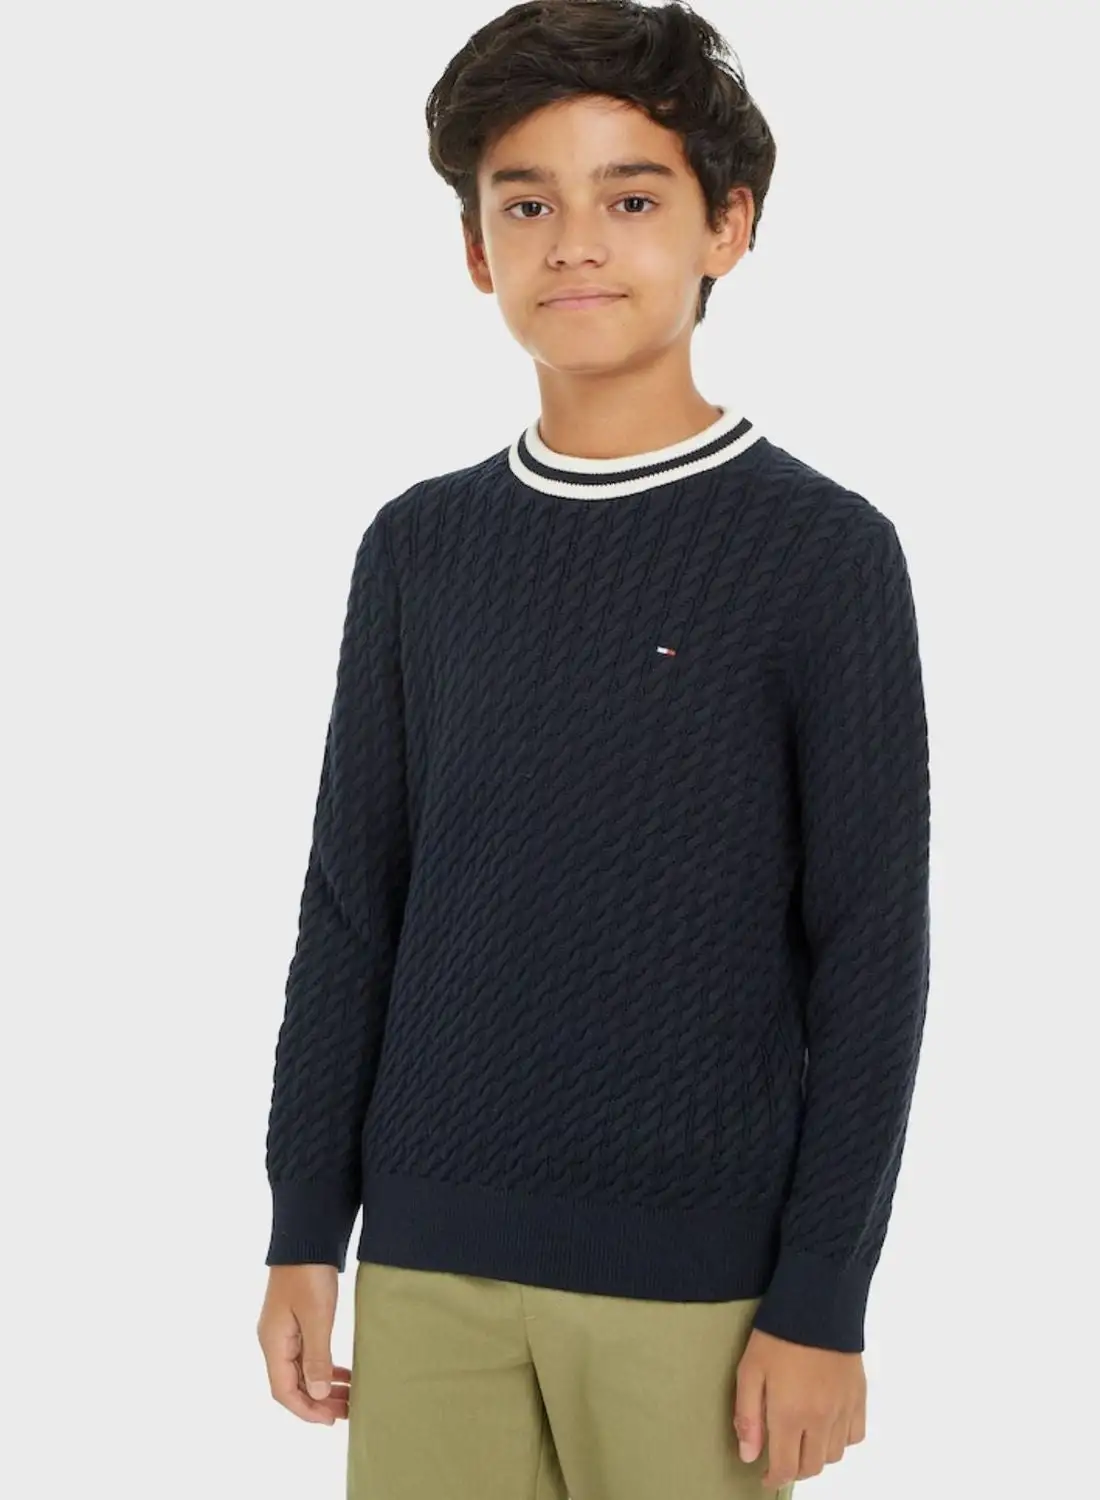 TOMMY HILFIGER Youth Knitted Sweater